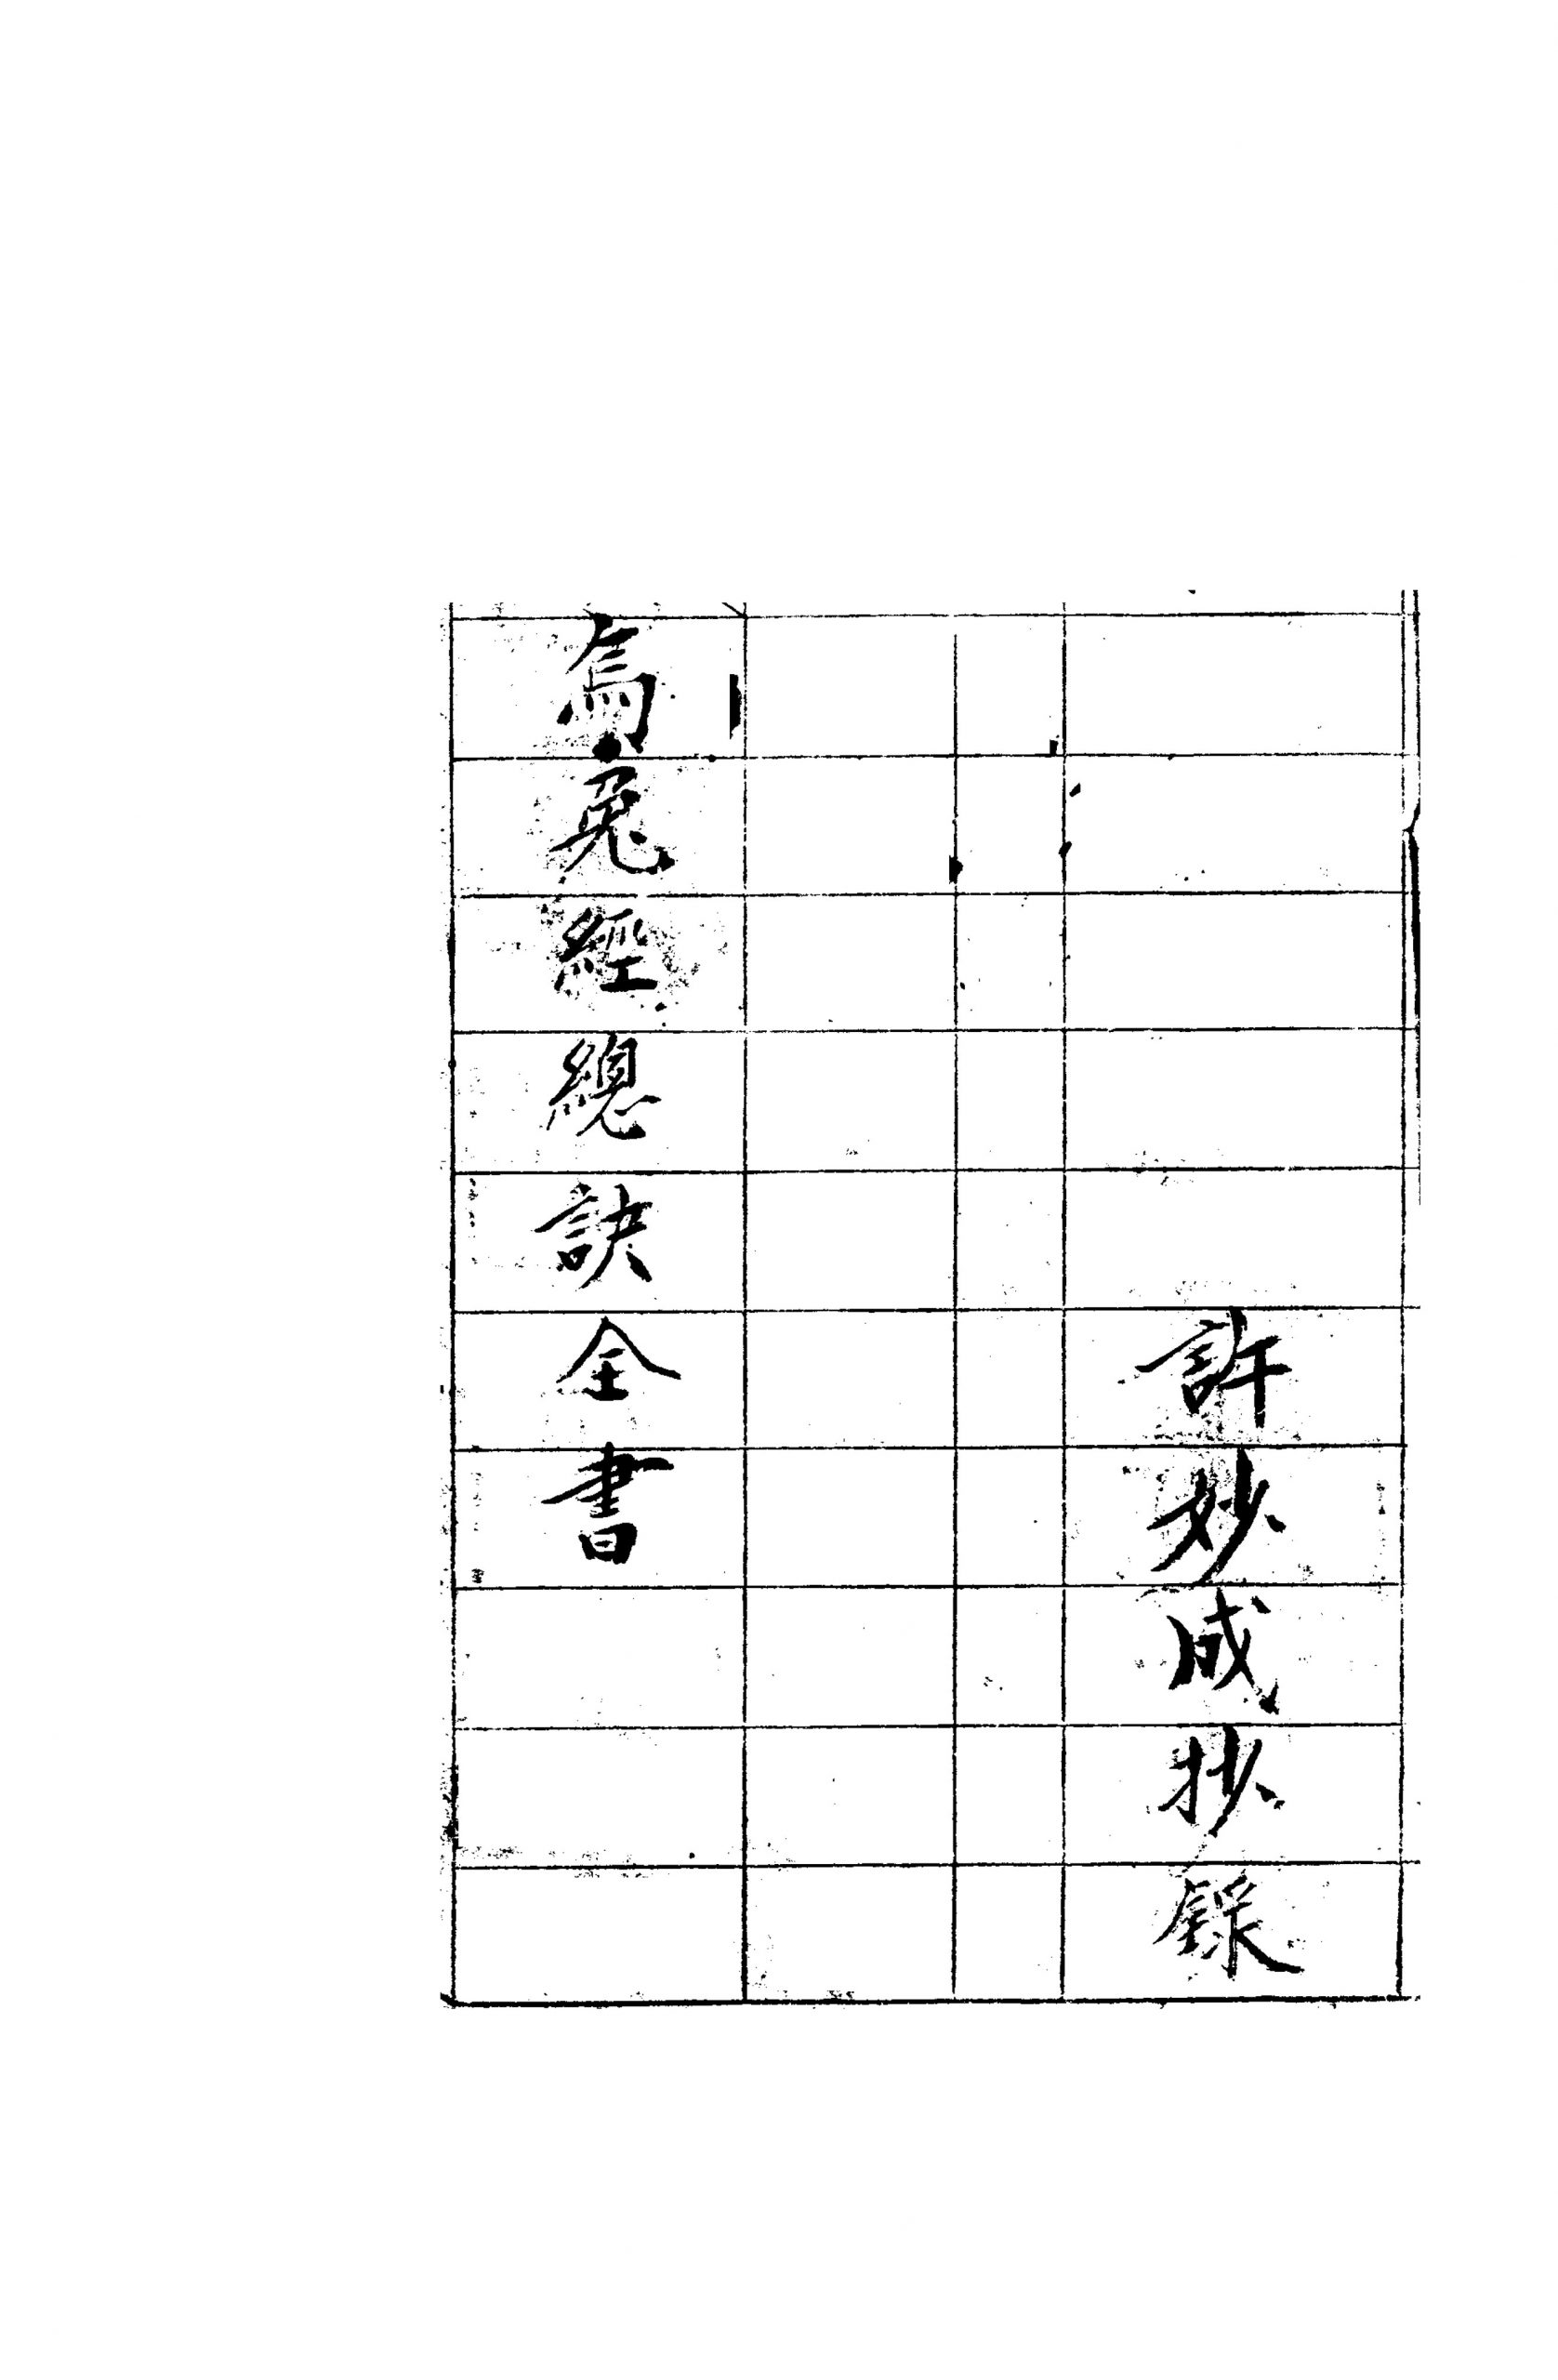 The Complete Book of the General Secrets of the Wu Rabbit Sutra (Handwritten) Yang Yunsong